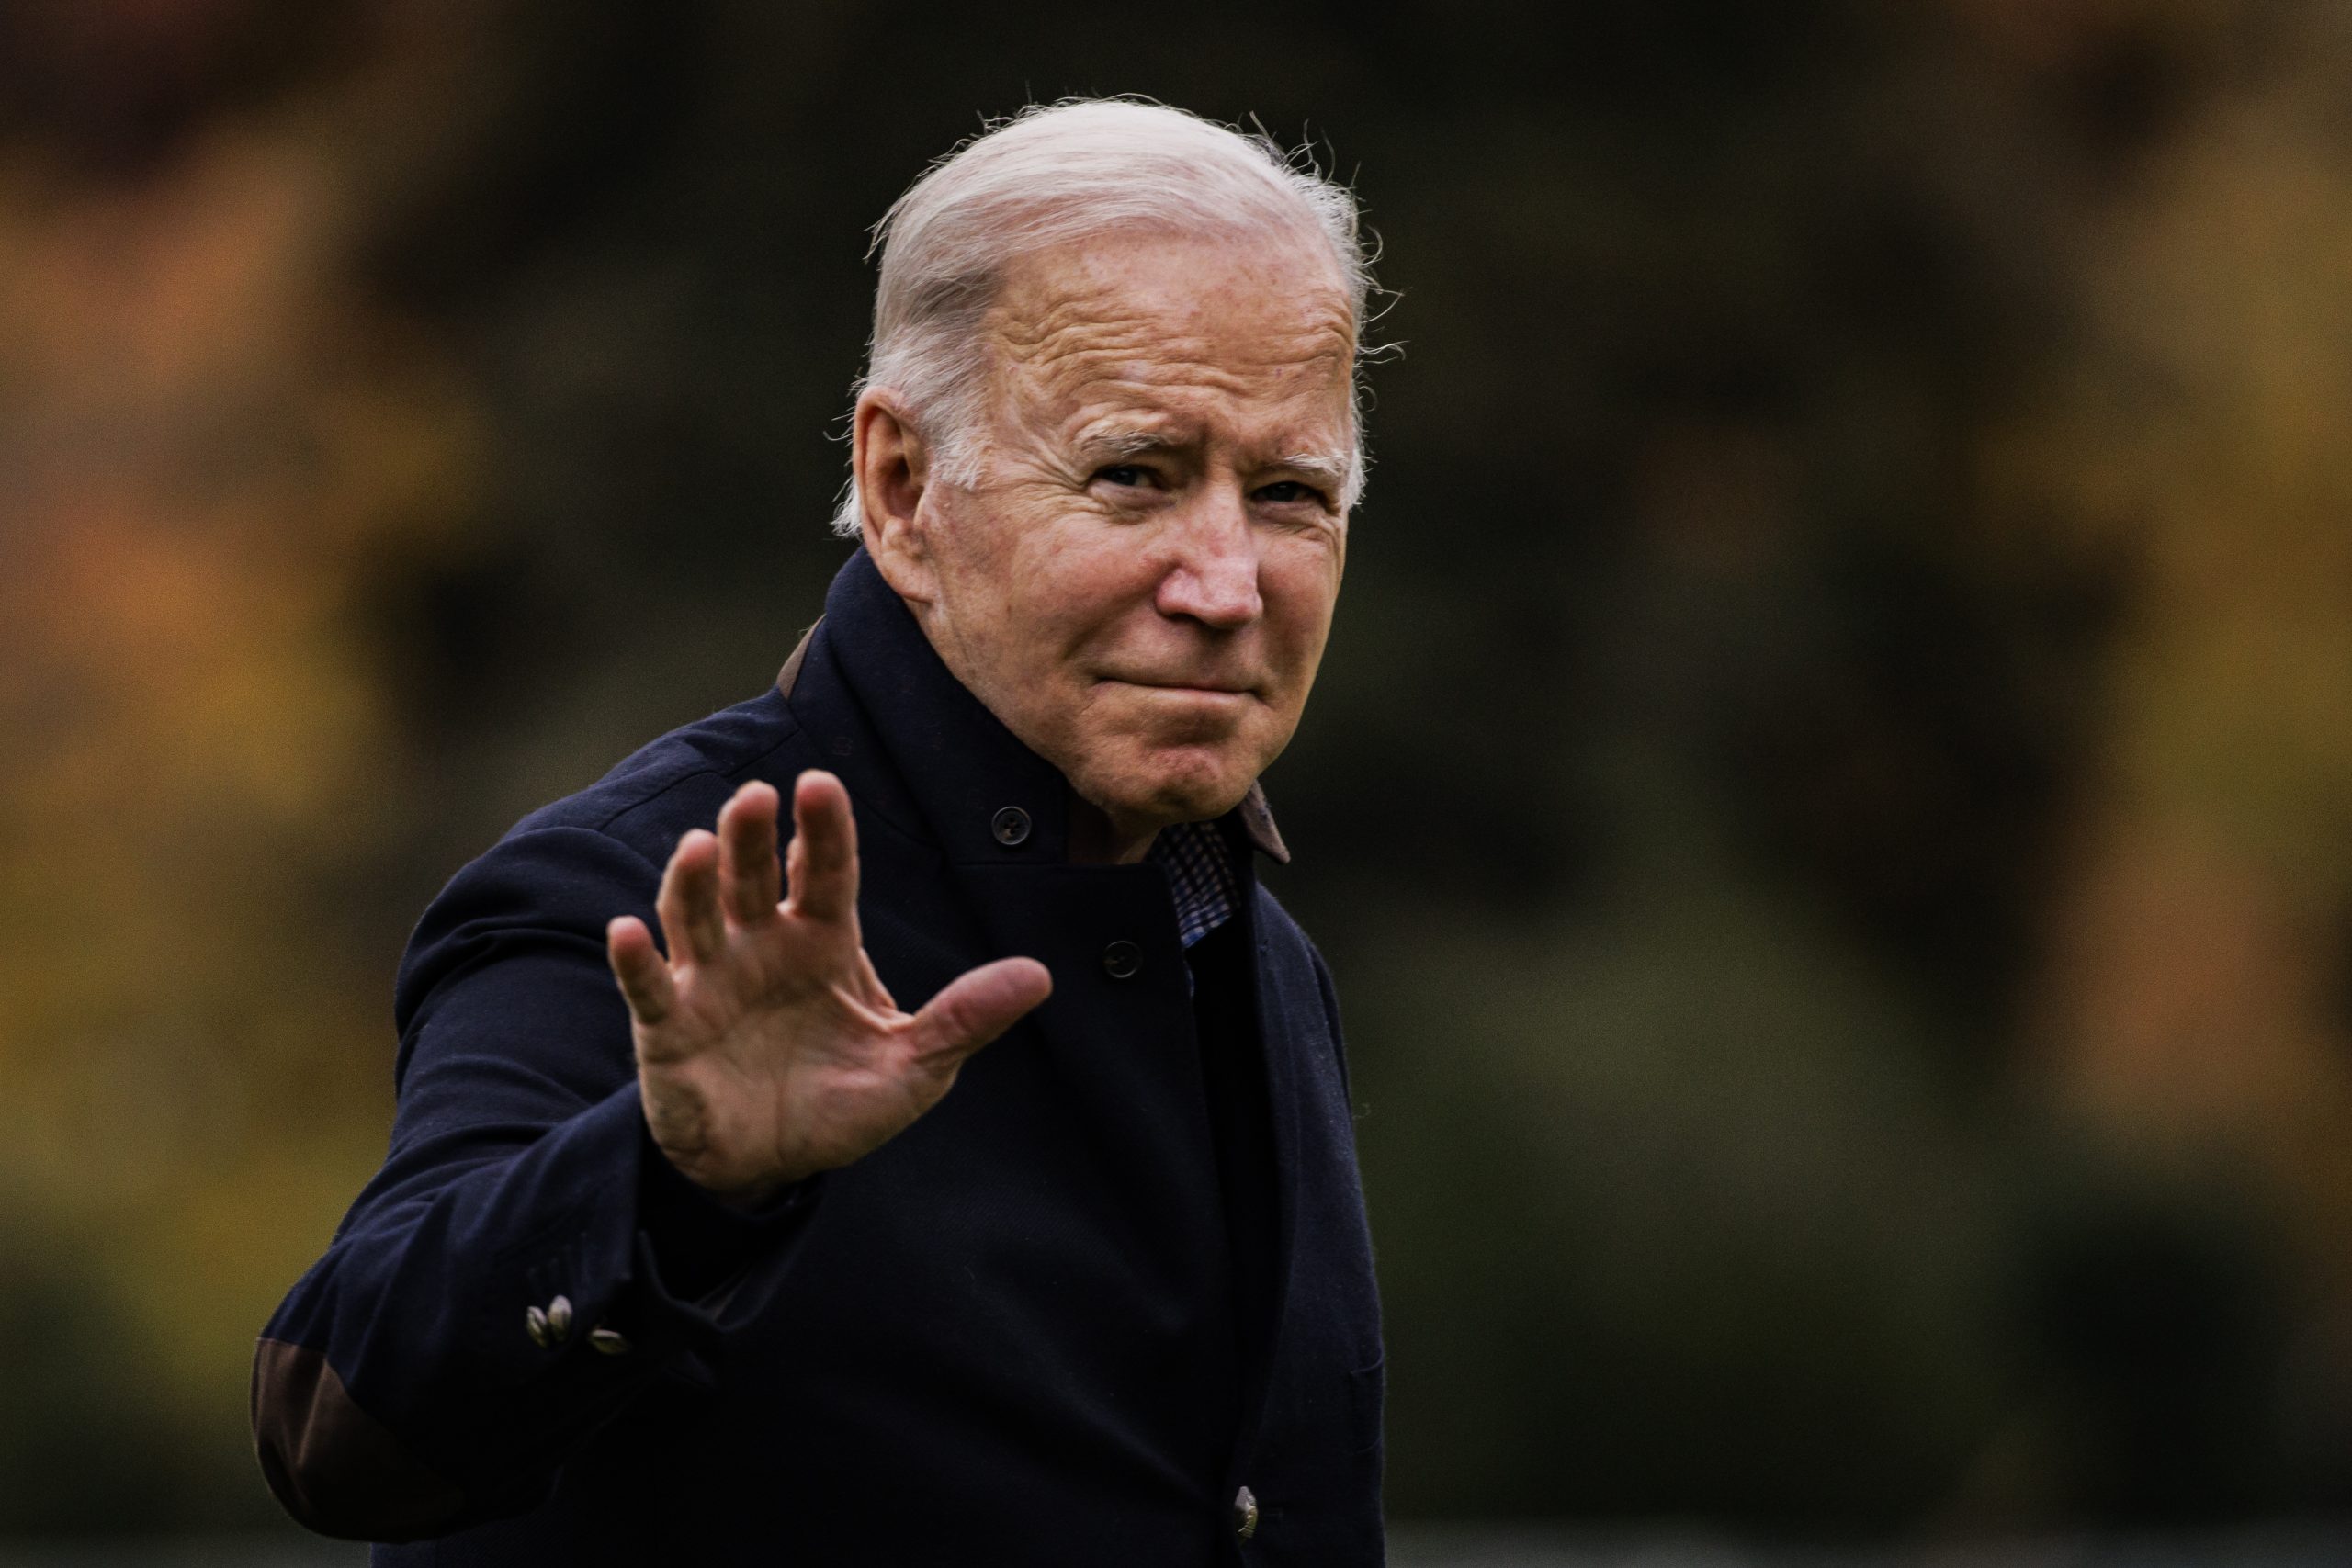 Biden’s generation is ceding the stage as he plots his next act